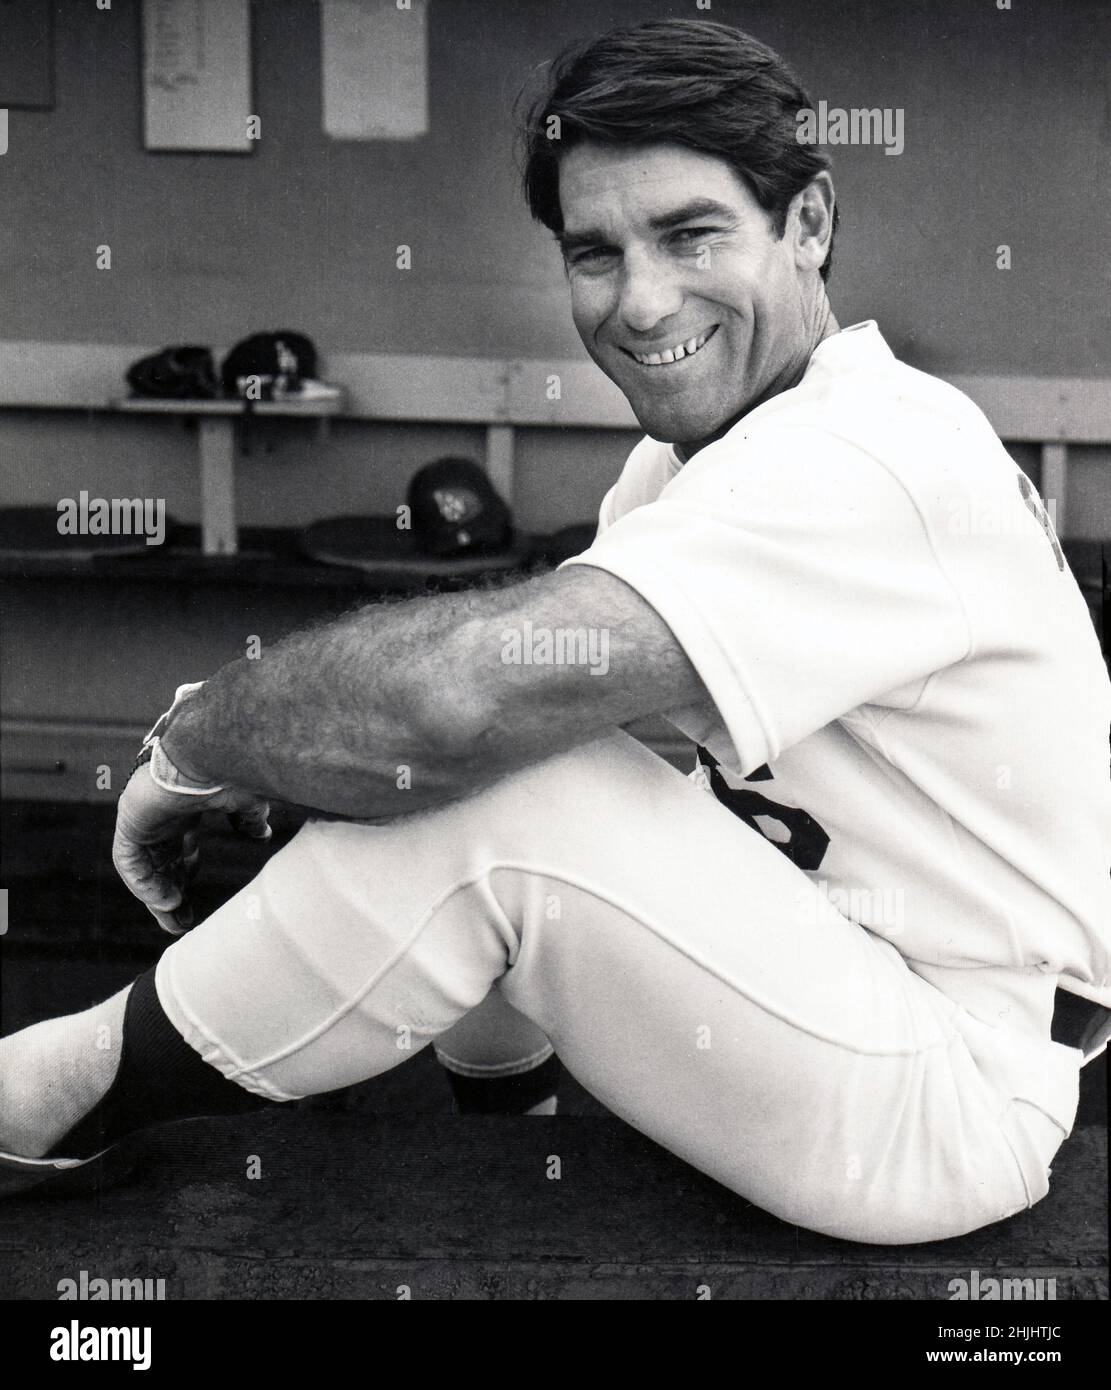 Posed portrait of Dodgers star first baseman Steve Garvey on the steps of the dugout at Dodger Stadium in Chavez Ravine, Los Angeles, California circa 1977. Stock Photo